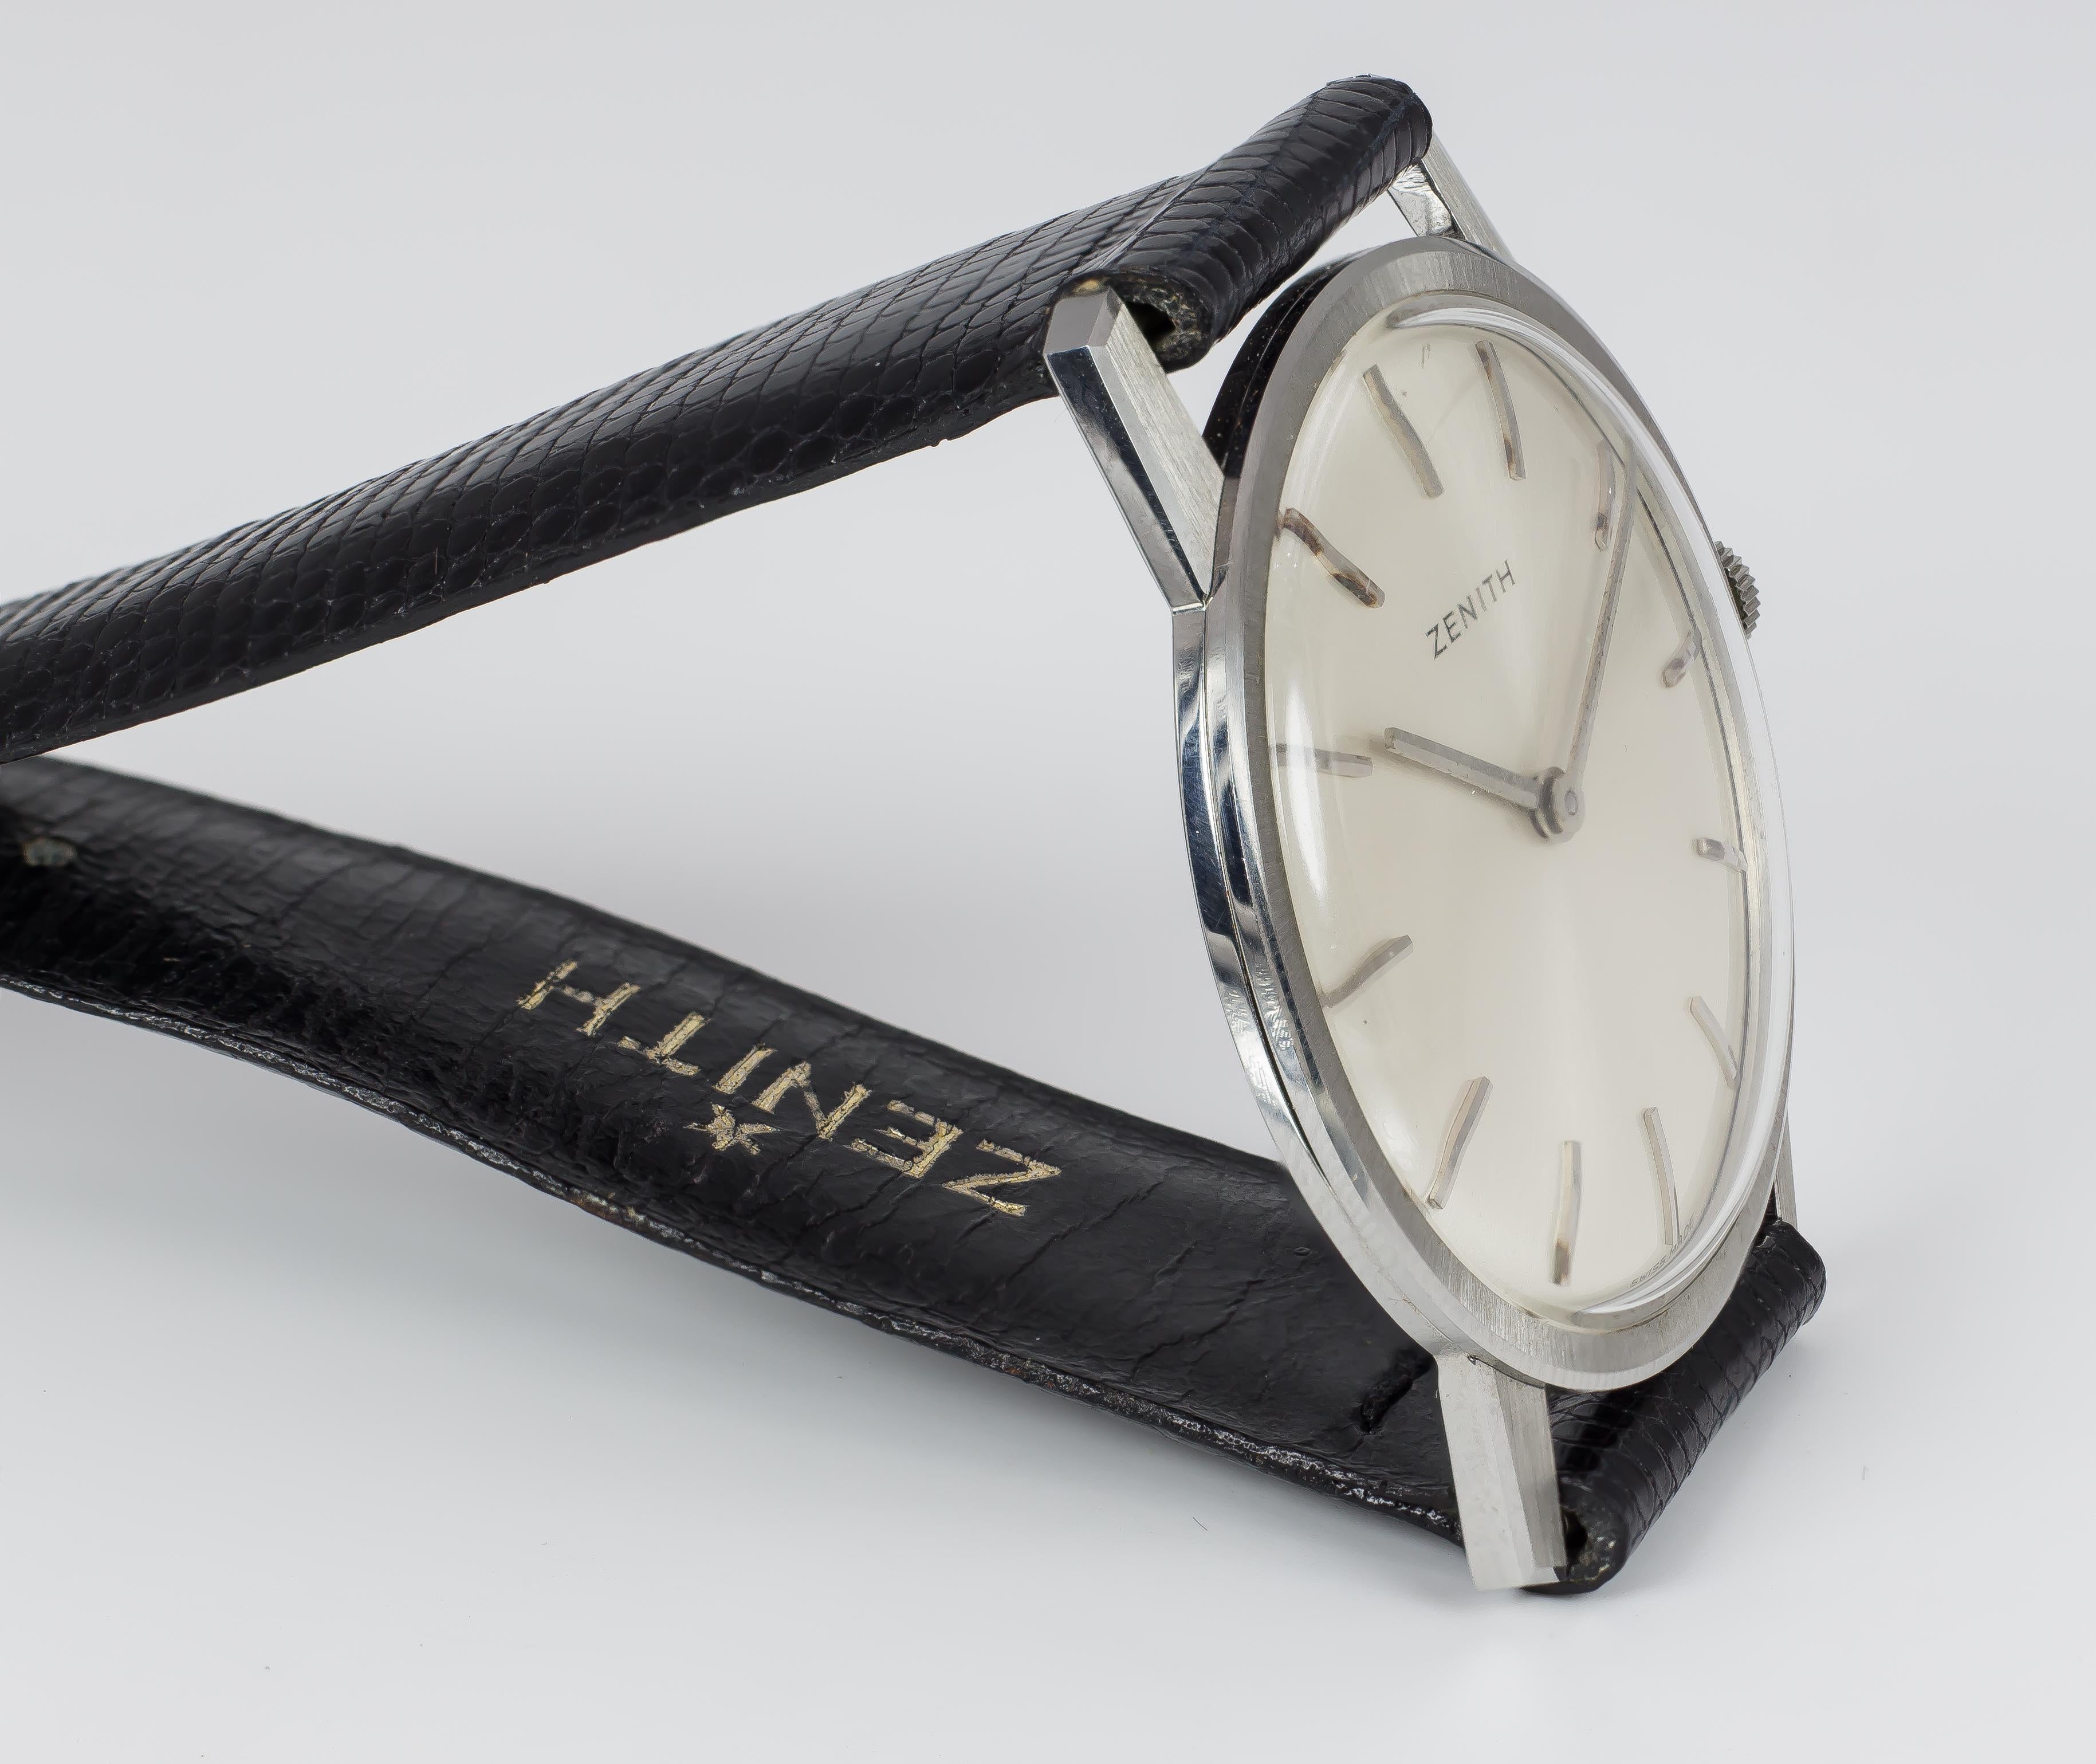 A vintage steel Zenith wrist watch, dating from the 1960s. 
It is a manual wind watch. 

BRAND
Zenith

MATERIALS
Steel

MEASUREMENTS
Diameter: 33 mm